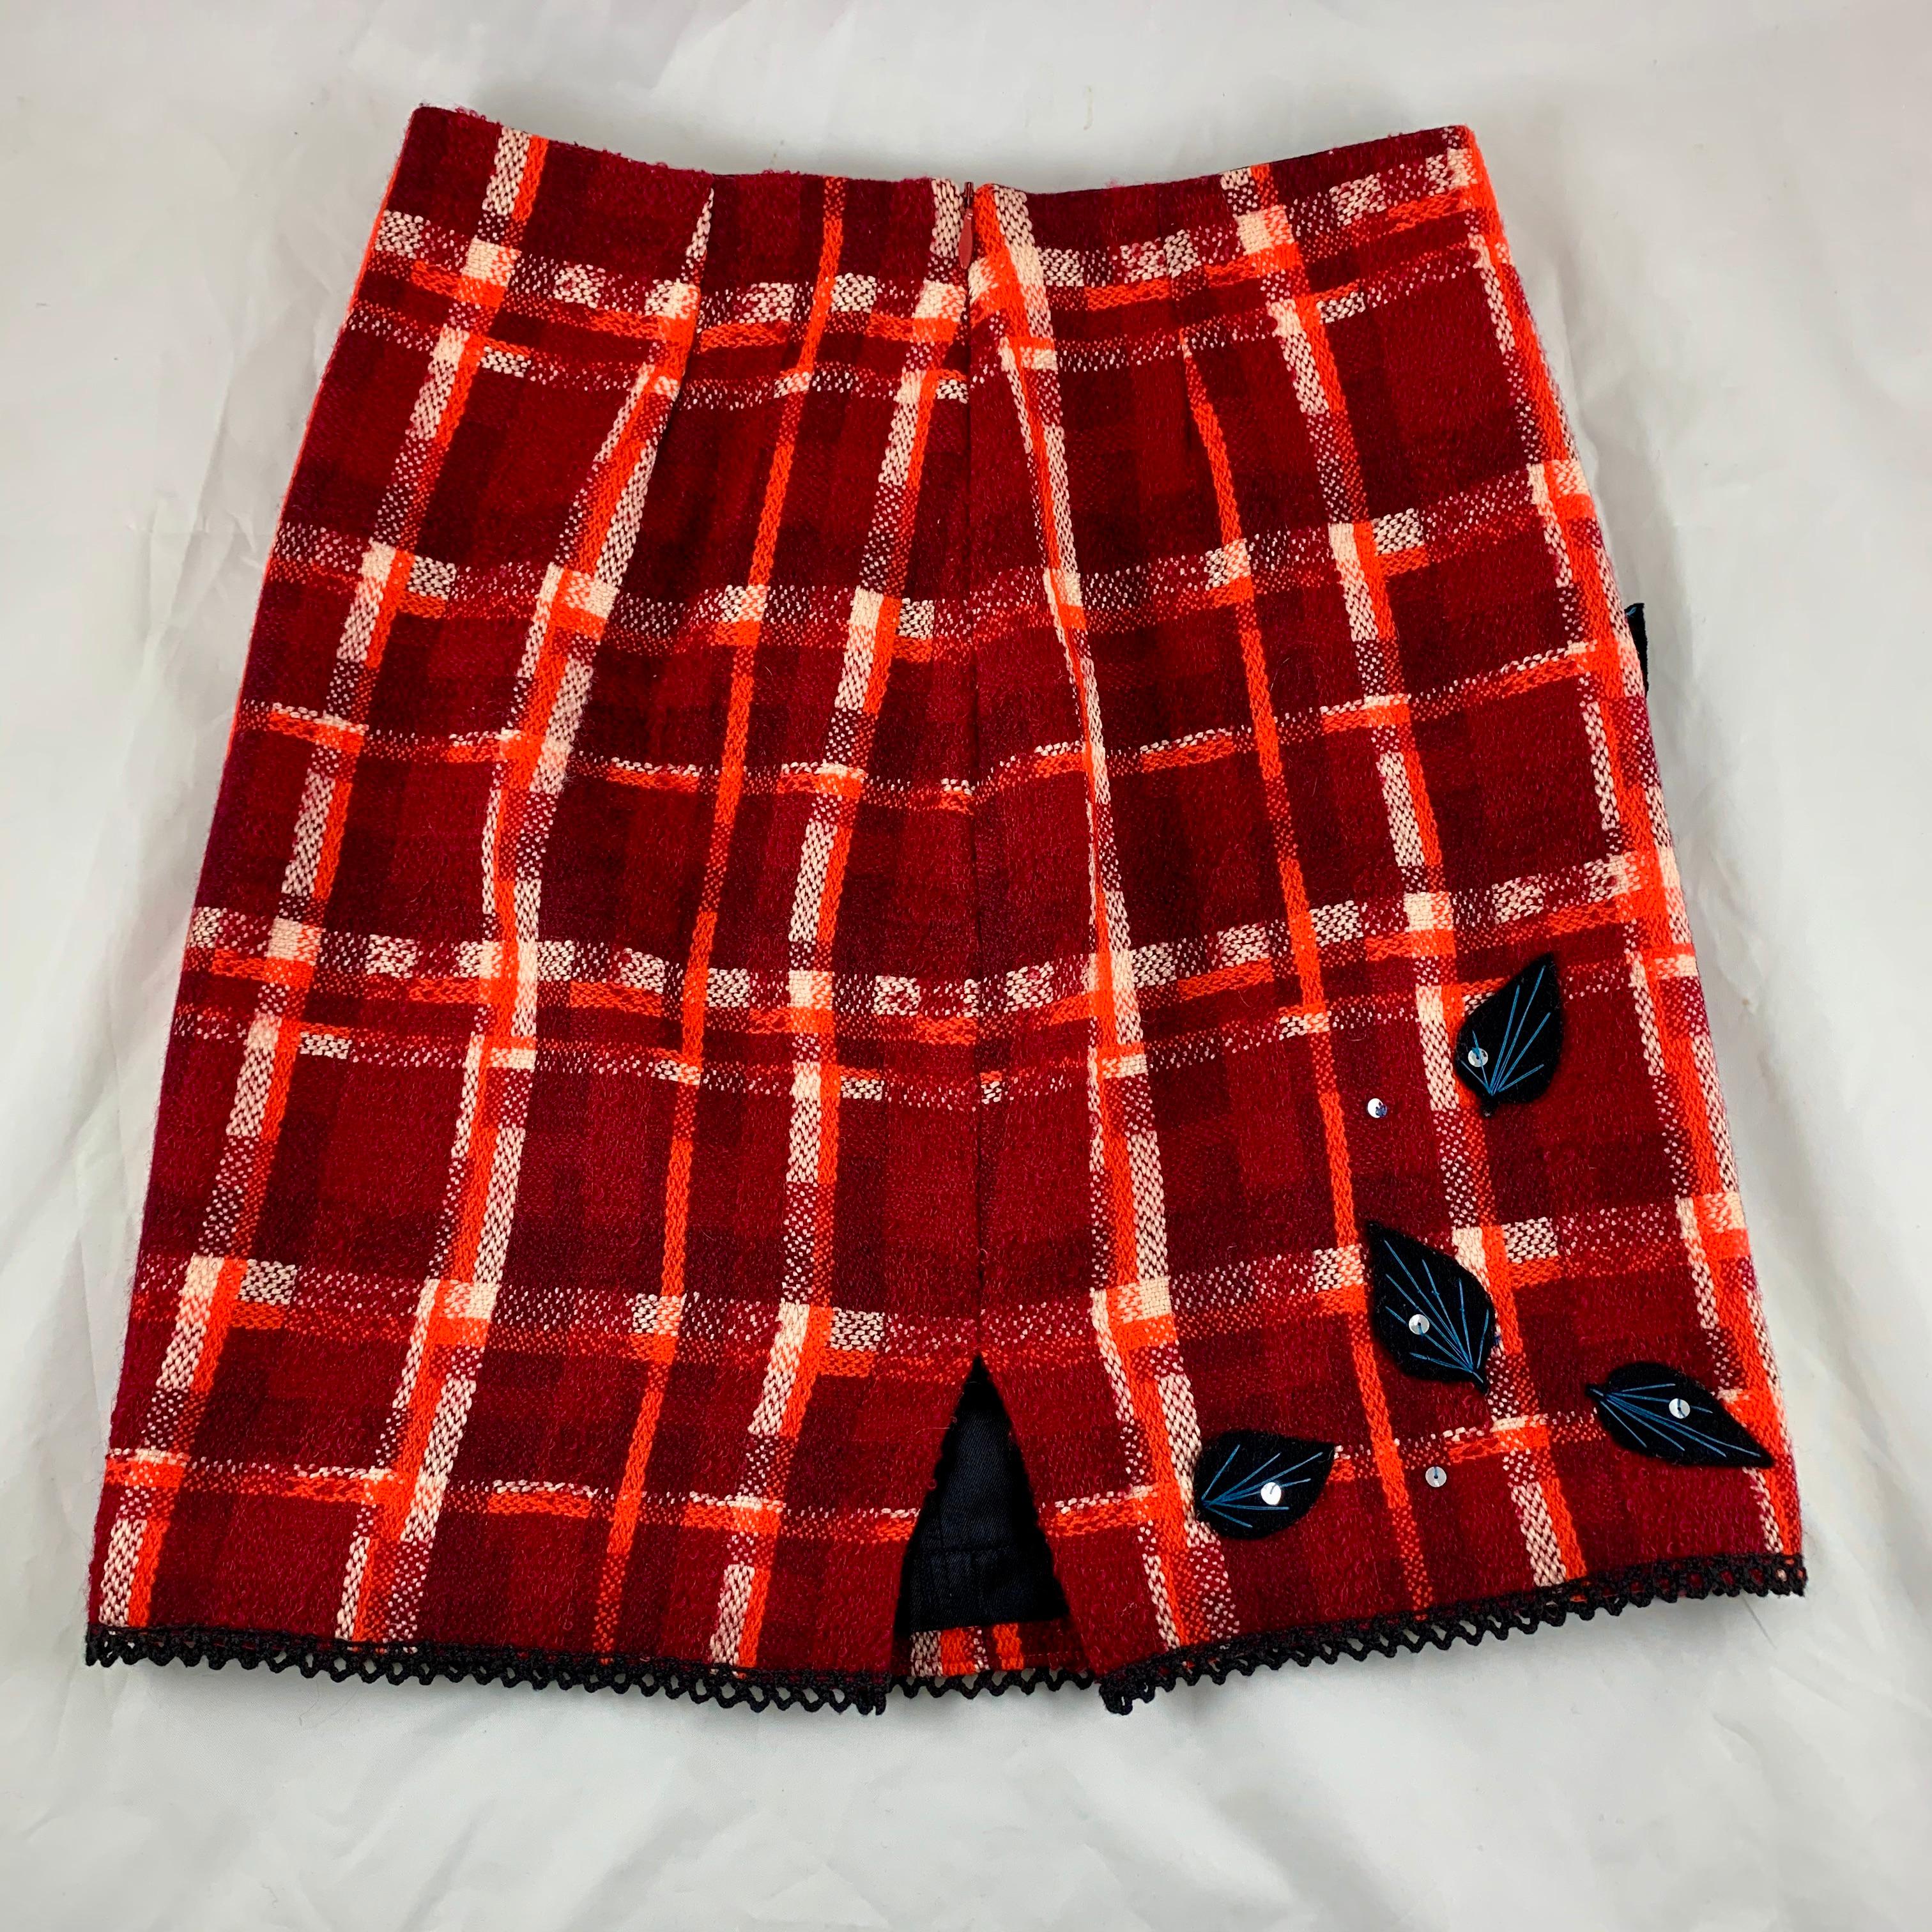 Late 20th Century Tracy Feith Red Plaid Wool Mini Skirt with Hand Appliqué Sequins & Leaves, 1980s For Sale